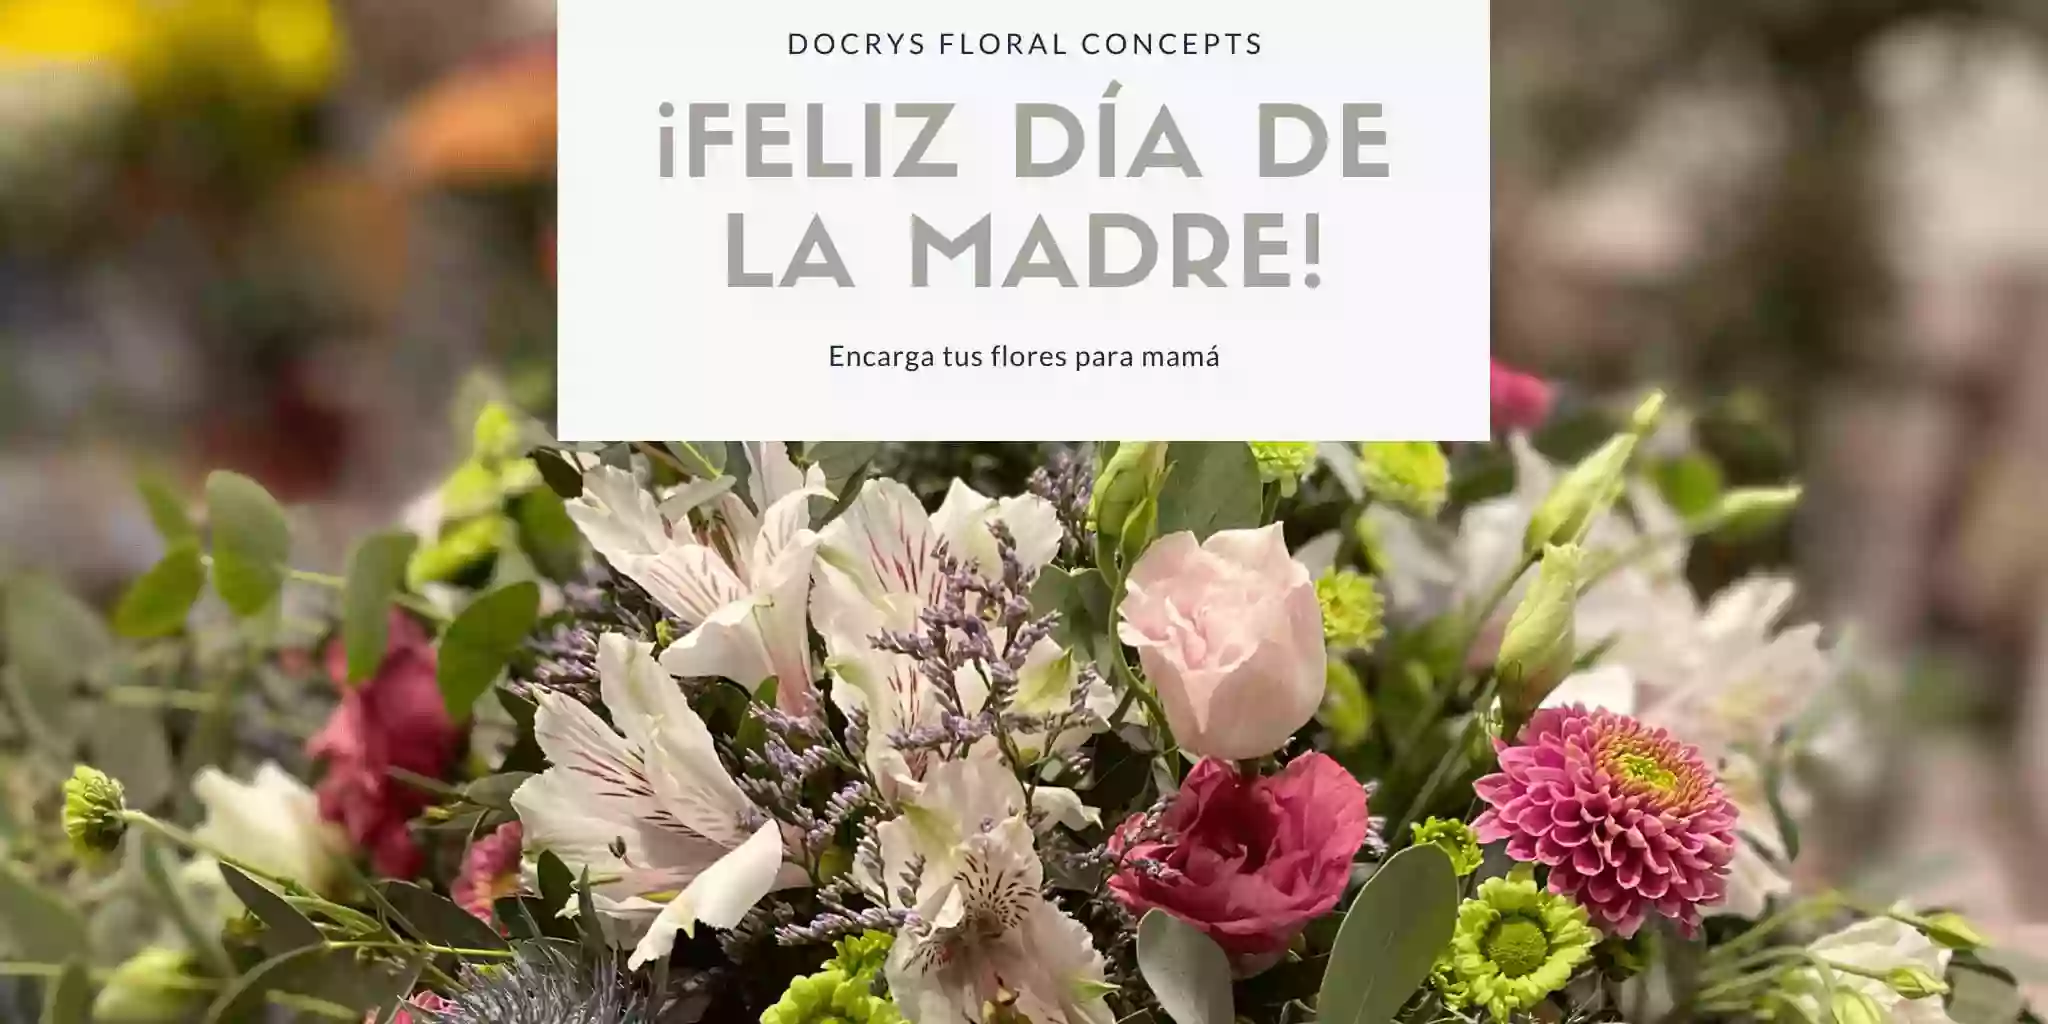 Docrys Floral Concepts